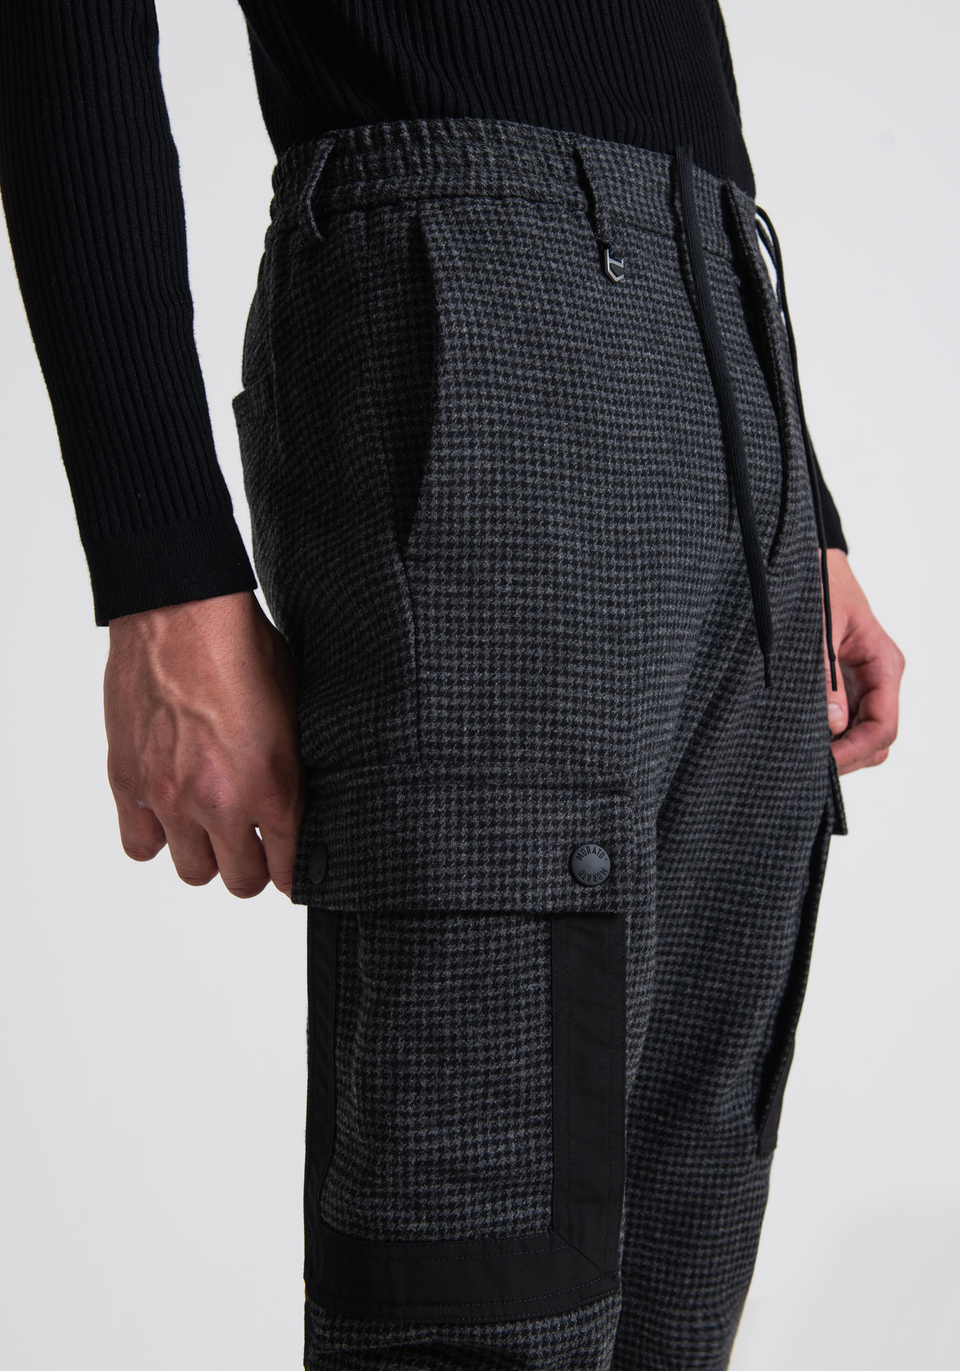 CARROT FIT TROUSERS IN WOOL-BLEND HOUNDSTOOTH FABRIC - Antony Morato Online Shop